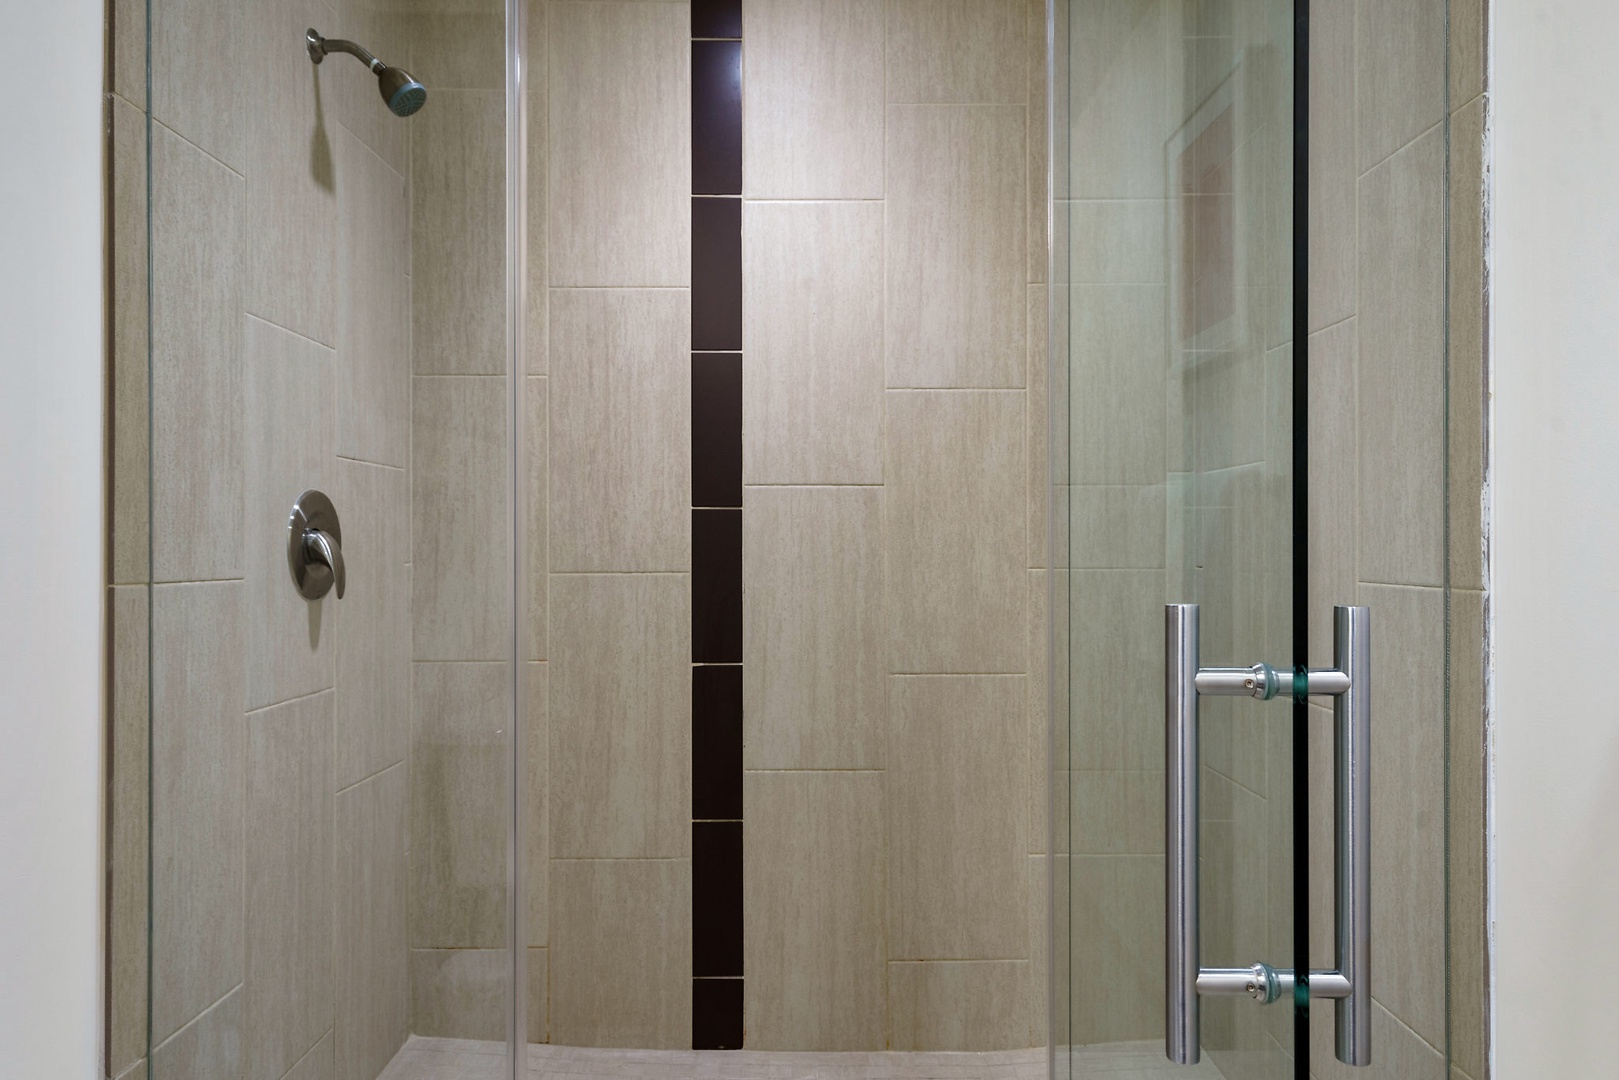 Revive in the modern walk-in shower with sleek fixtures.